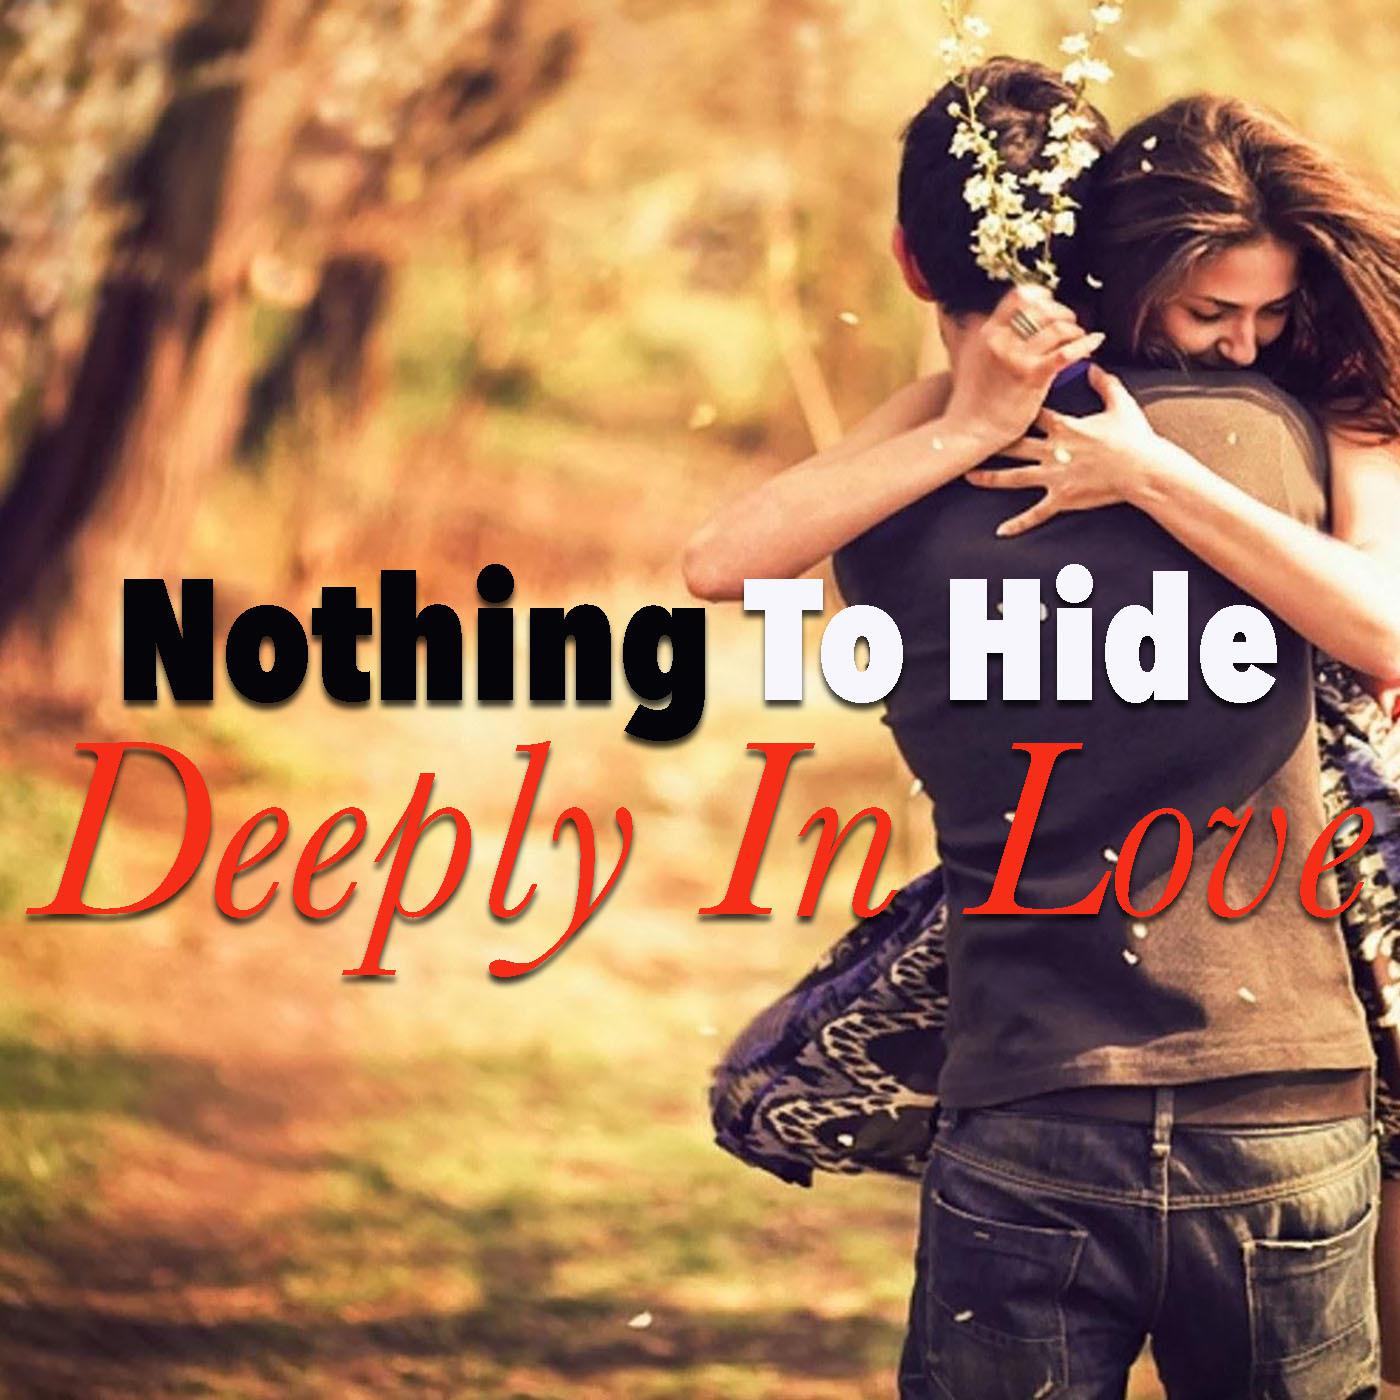 Nothing To Hide. Deeply In Love